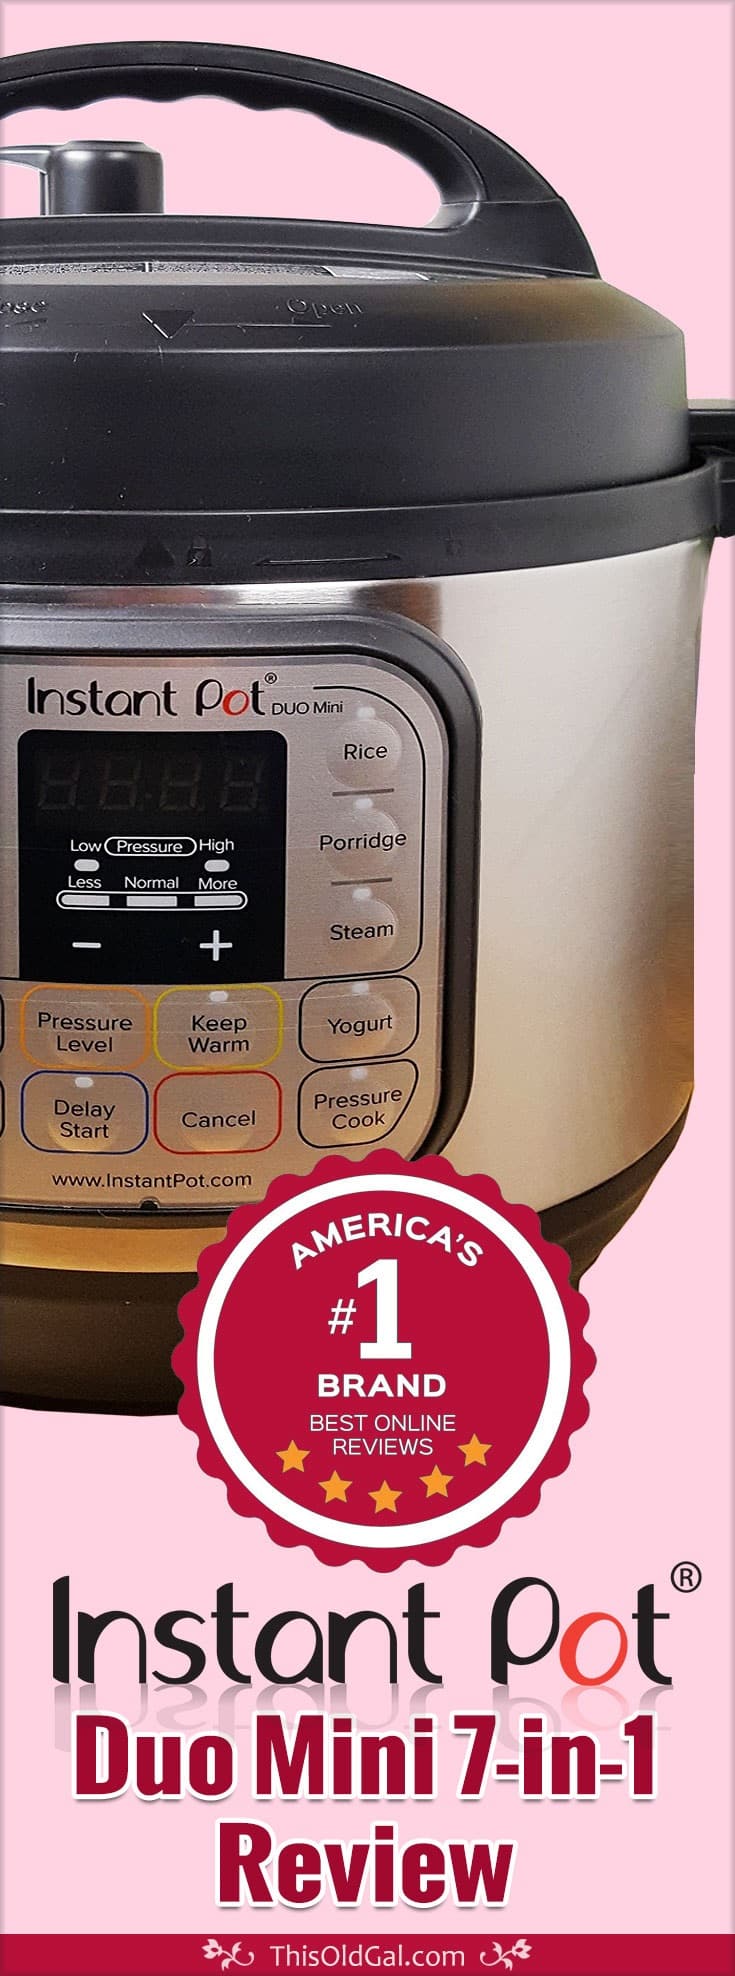 Instant Pot Duo Mini 7-in-1 Pressure Cooker Review